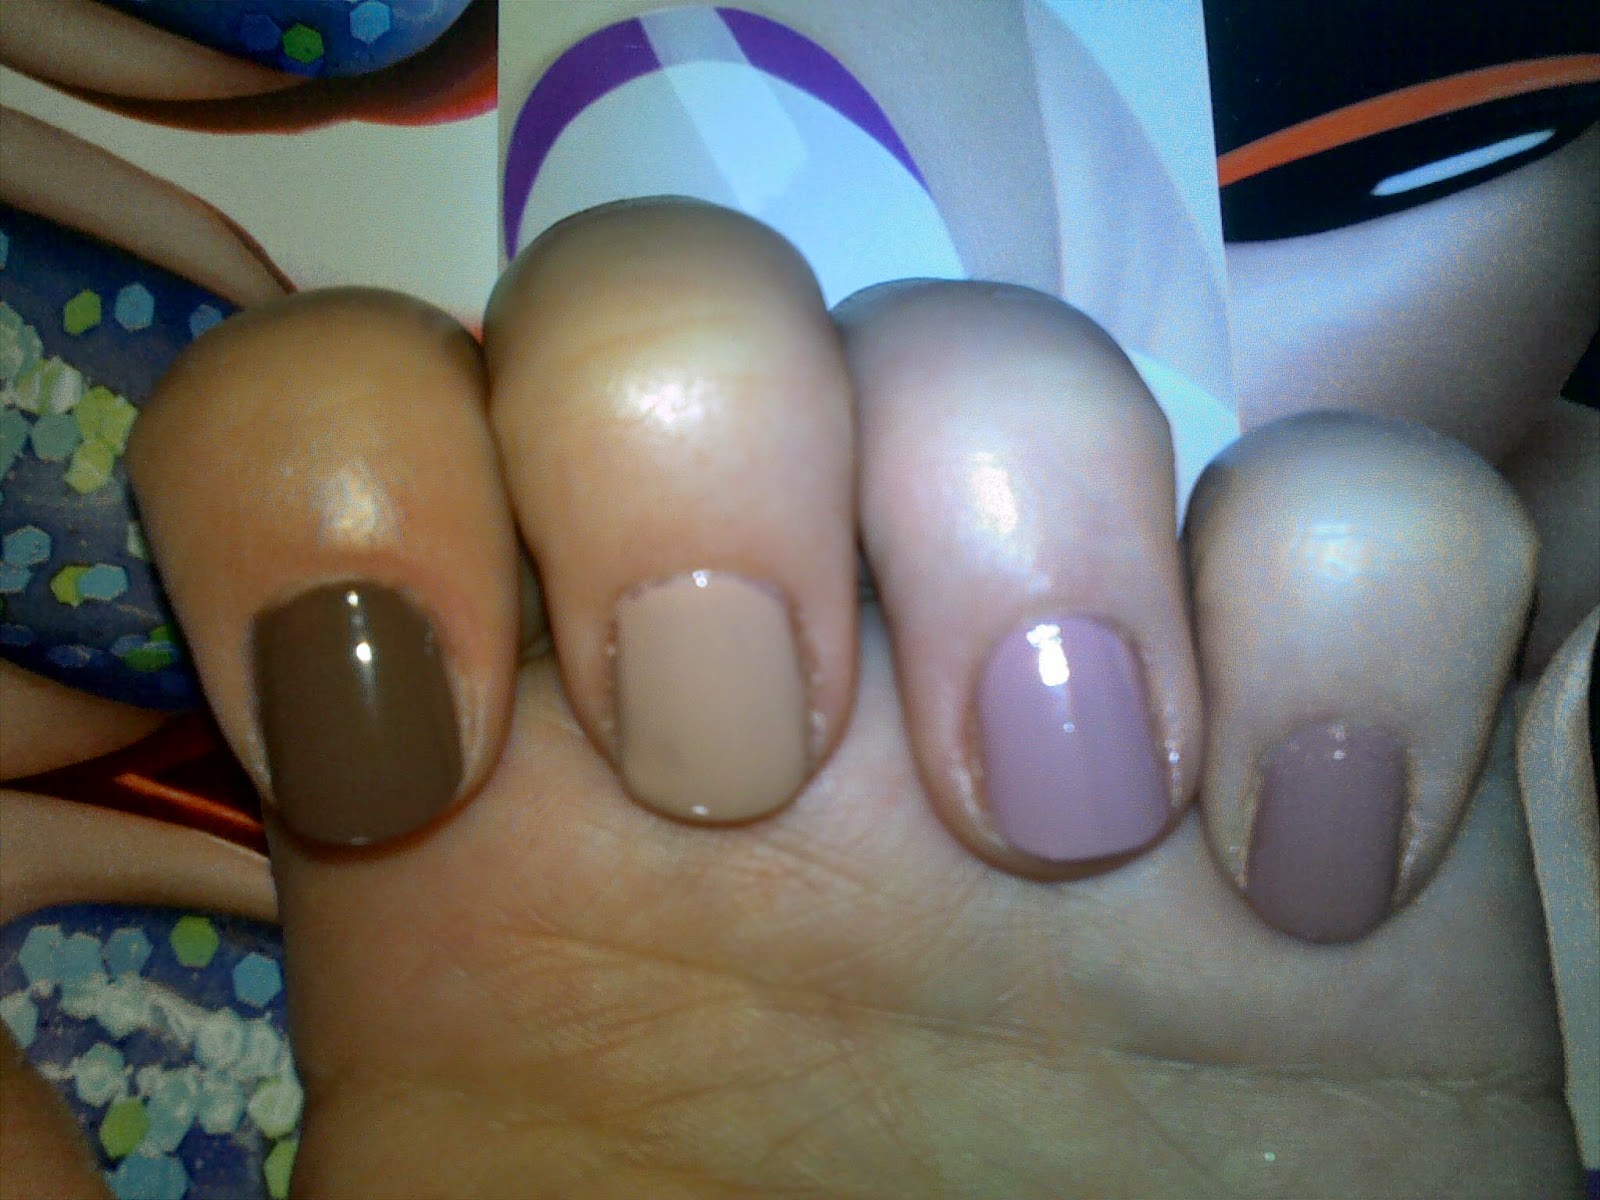 Nude nail polishes swatches from Radiant and L'oreal